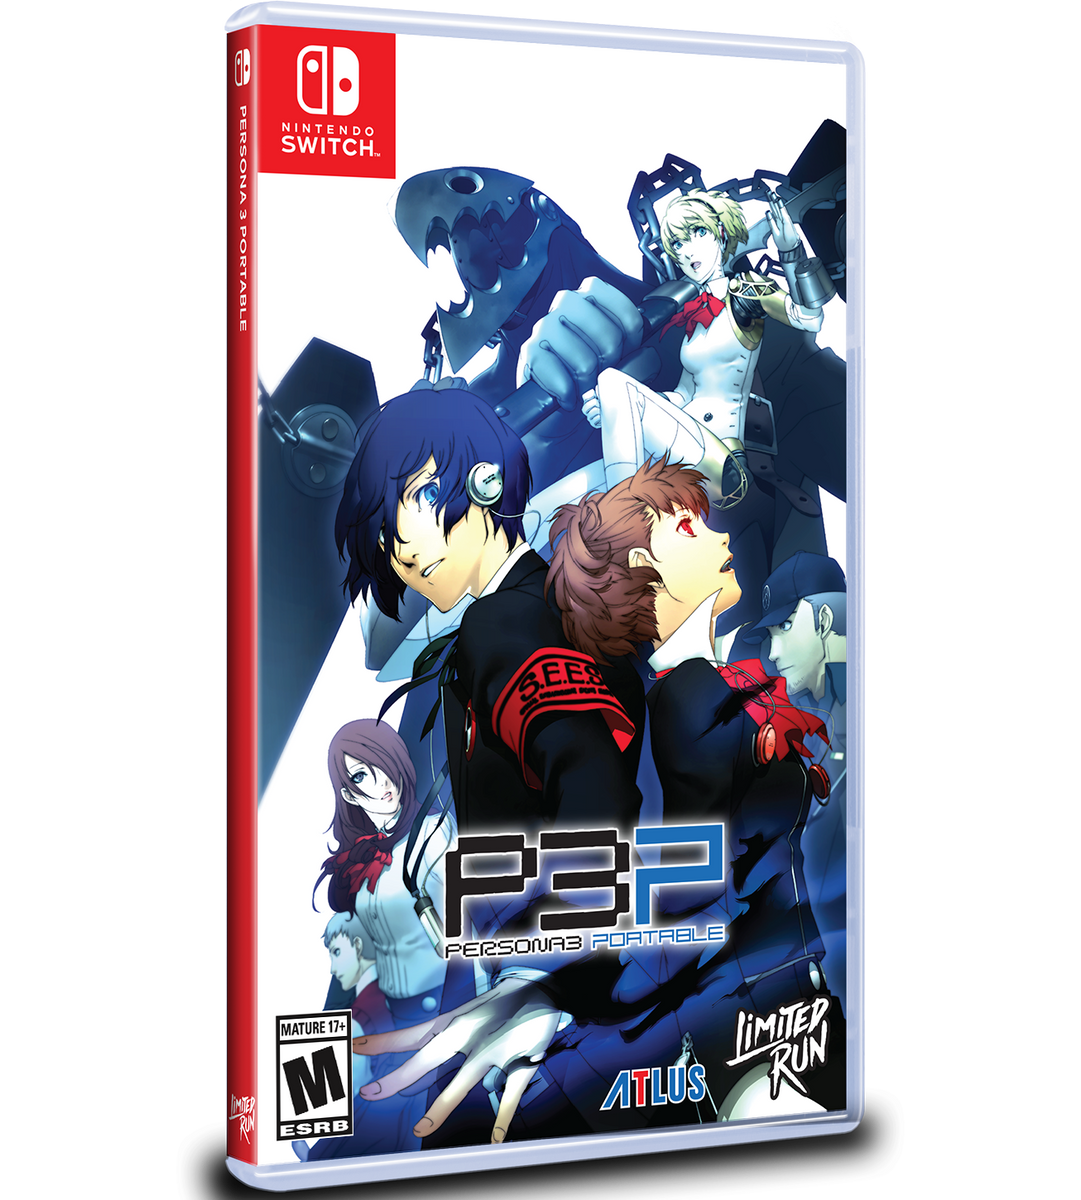 persona-3-portable-limited-run-games-switch_1200x1200.png